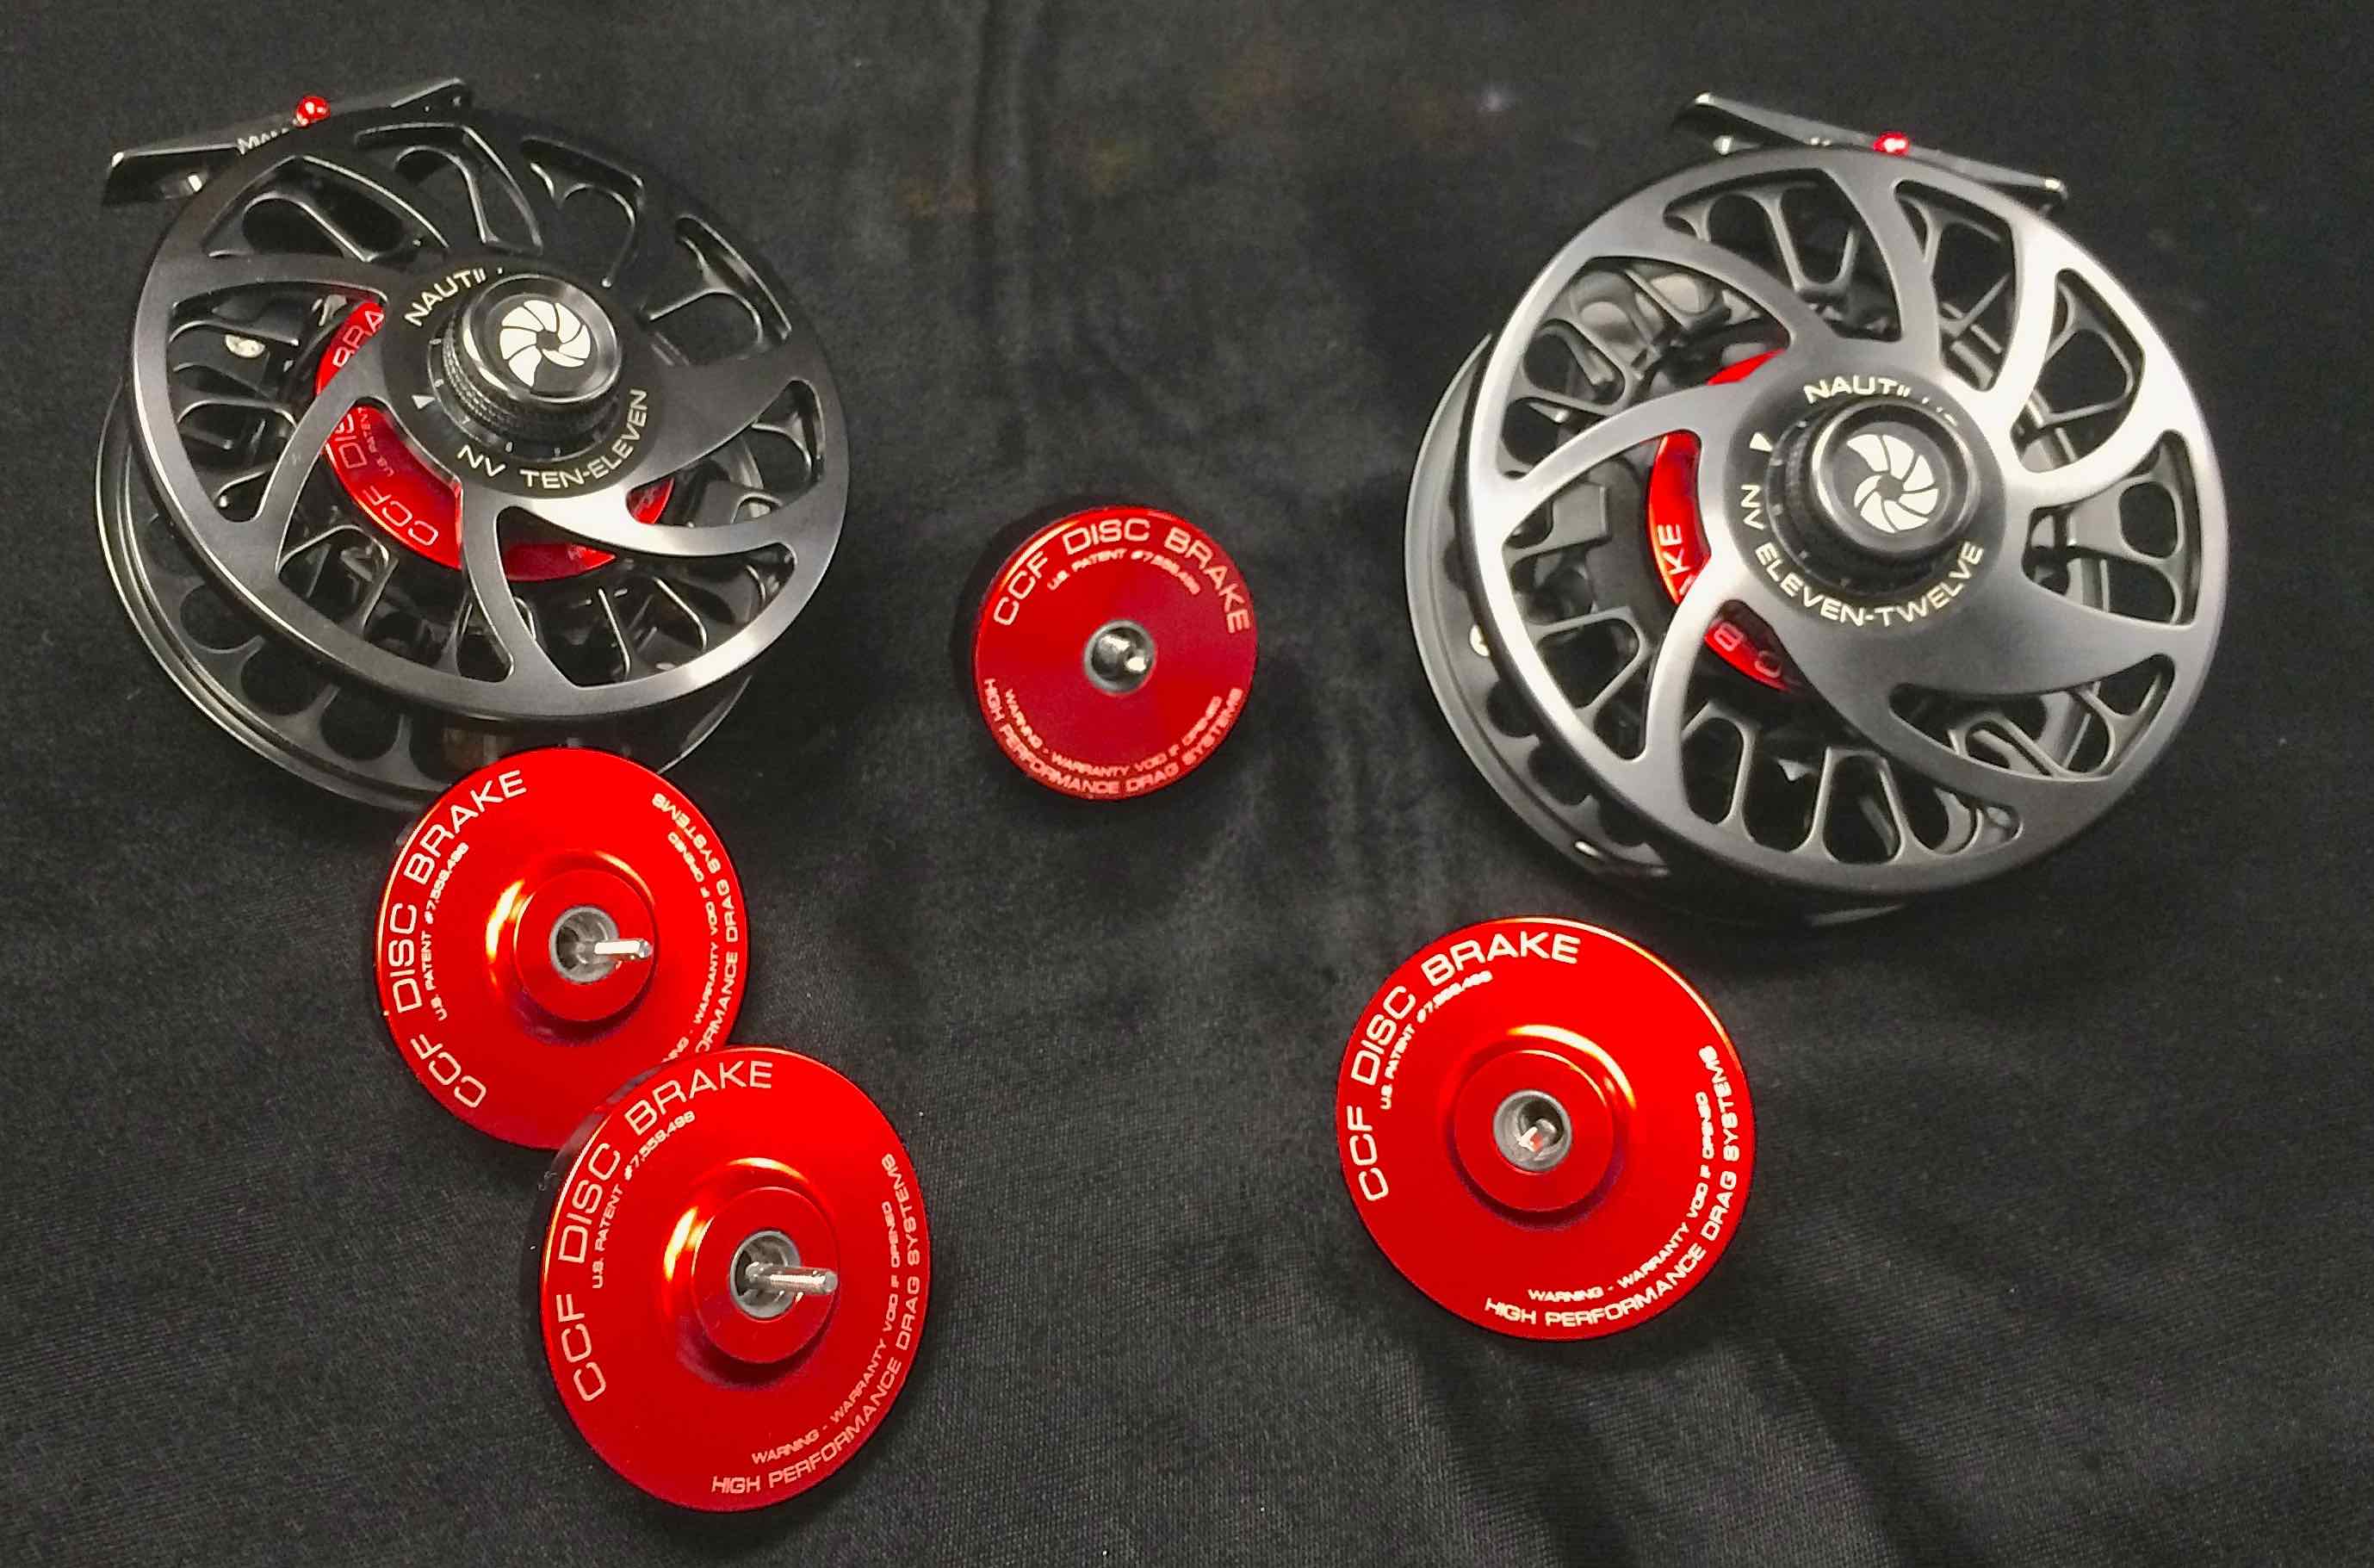 Nautilus X-Series XL Max Fly Reel – The First Cast – Hook, Line